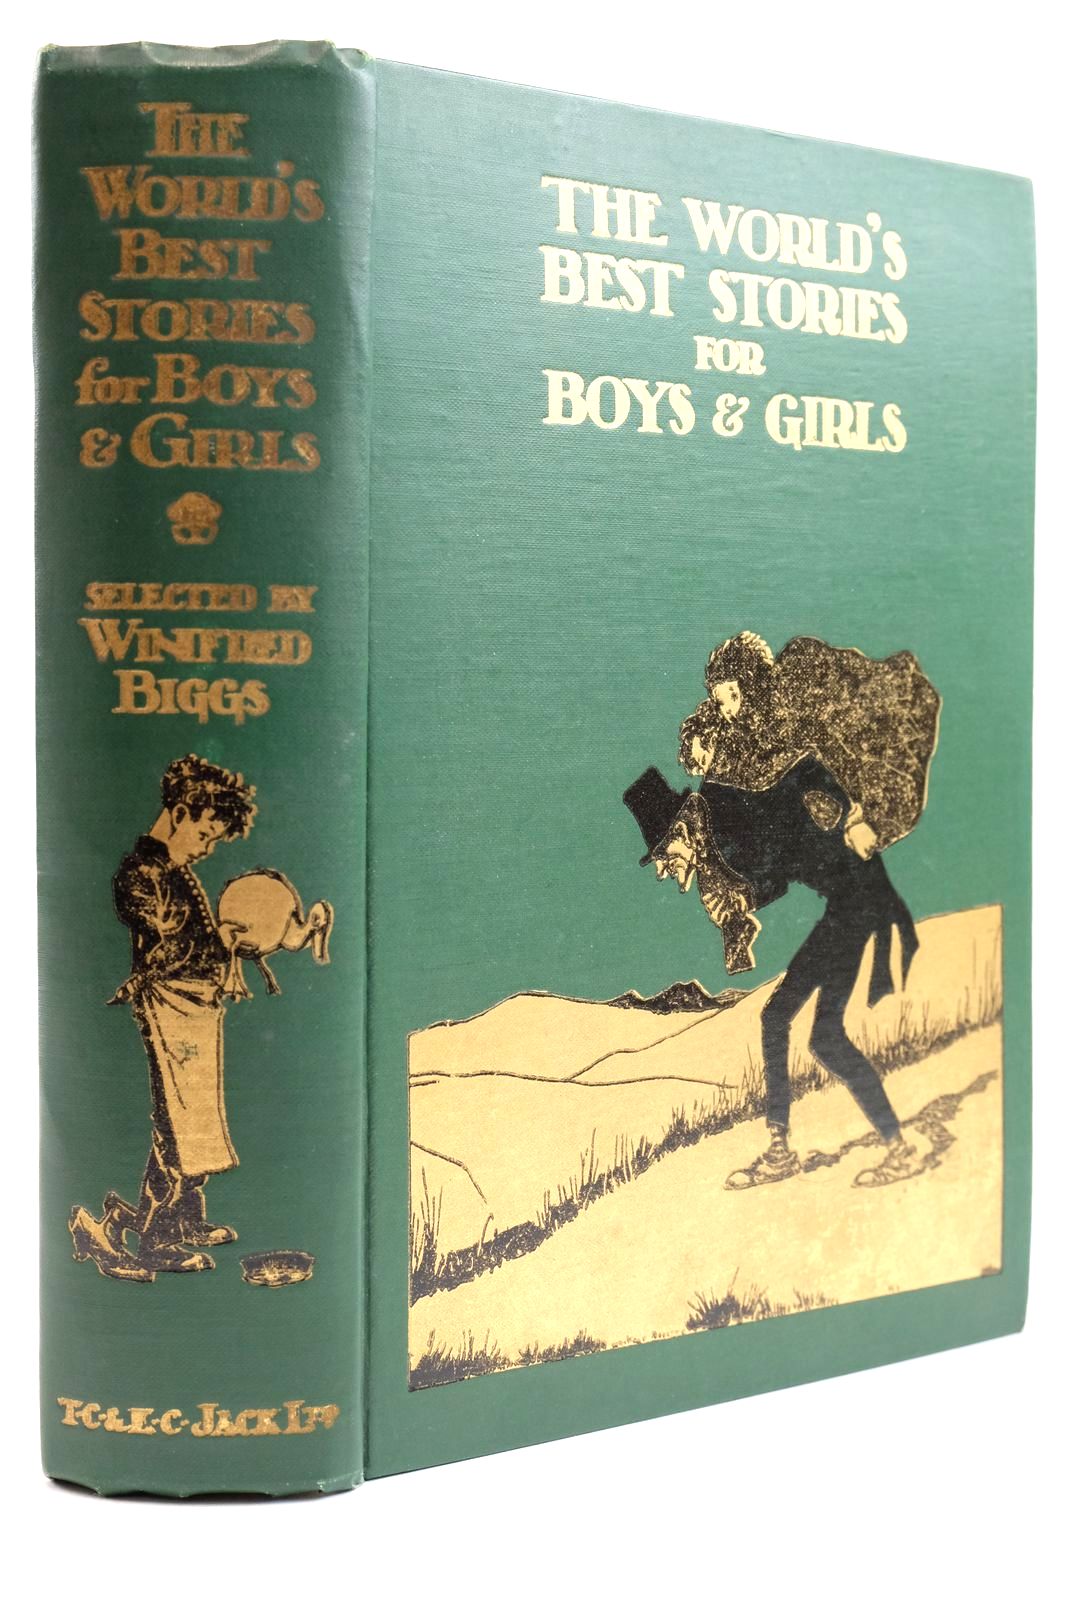 Photo of THE WORLD'S BEST STORIES FOR BOYS & GIRLS- Stock Number: 2133906